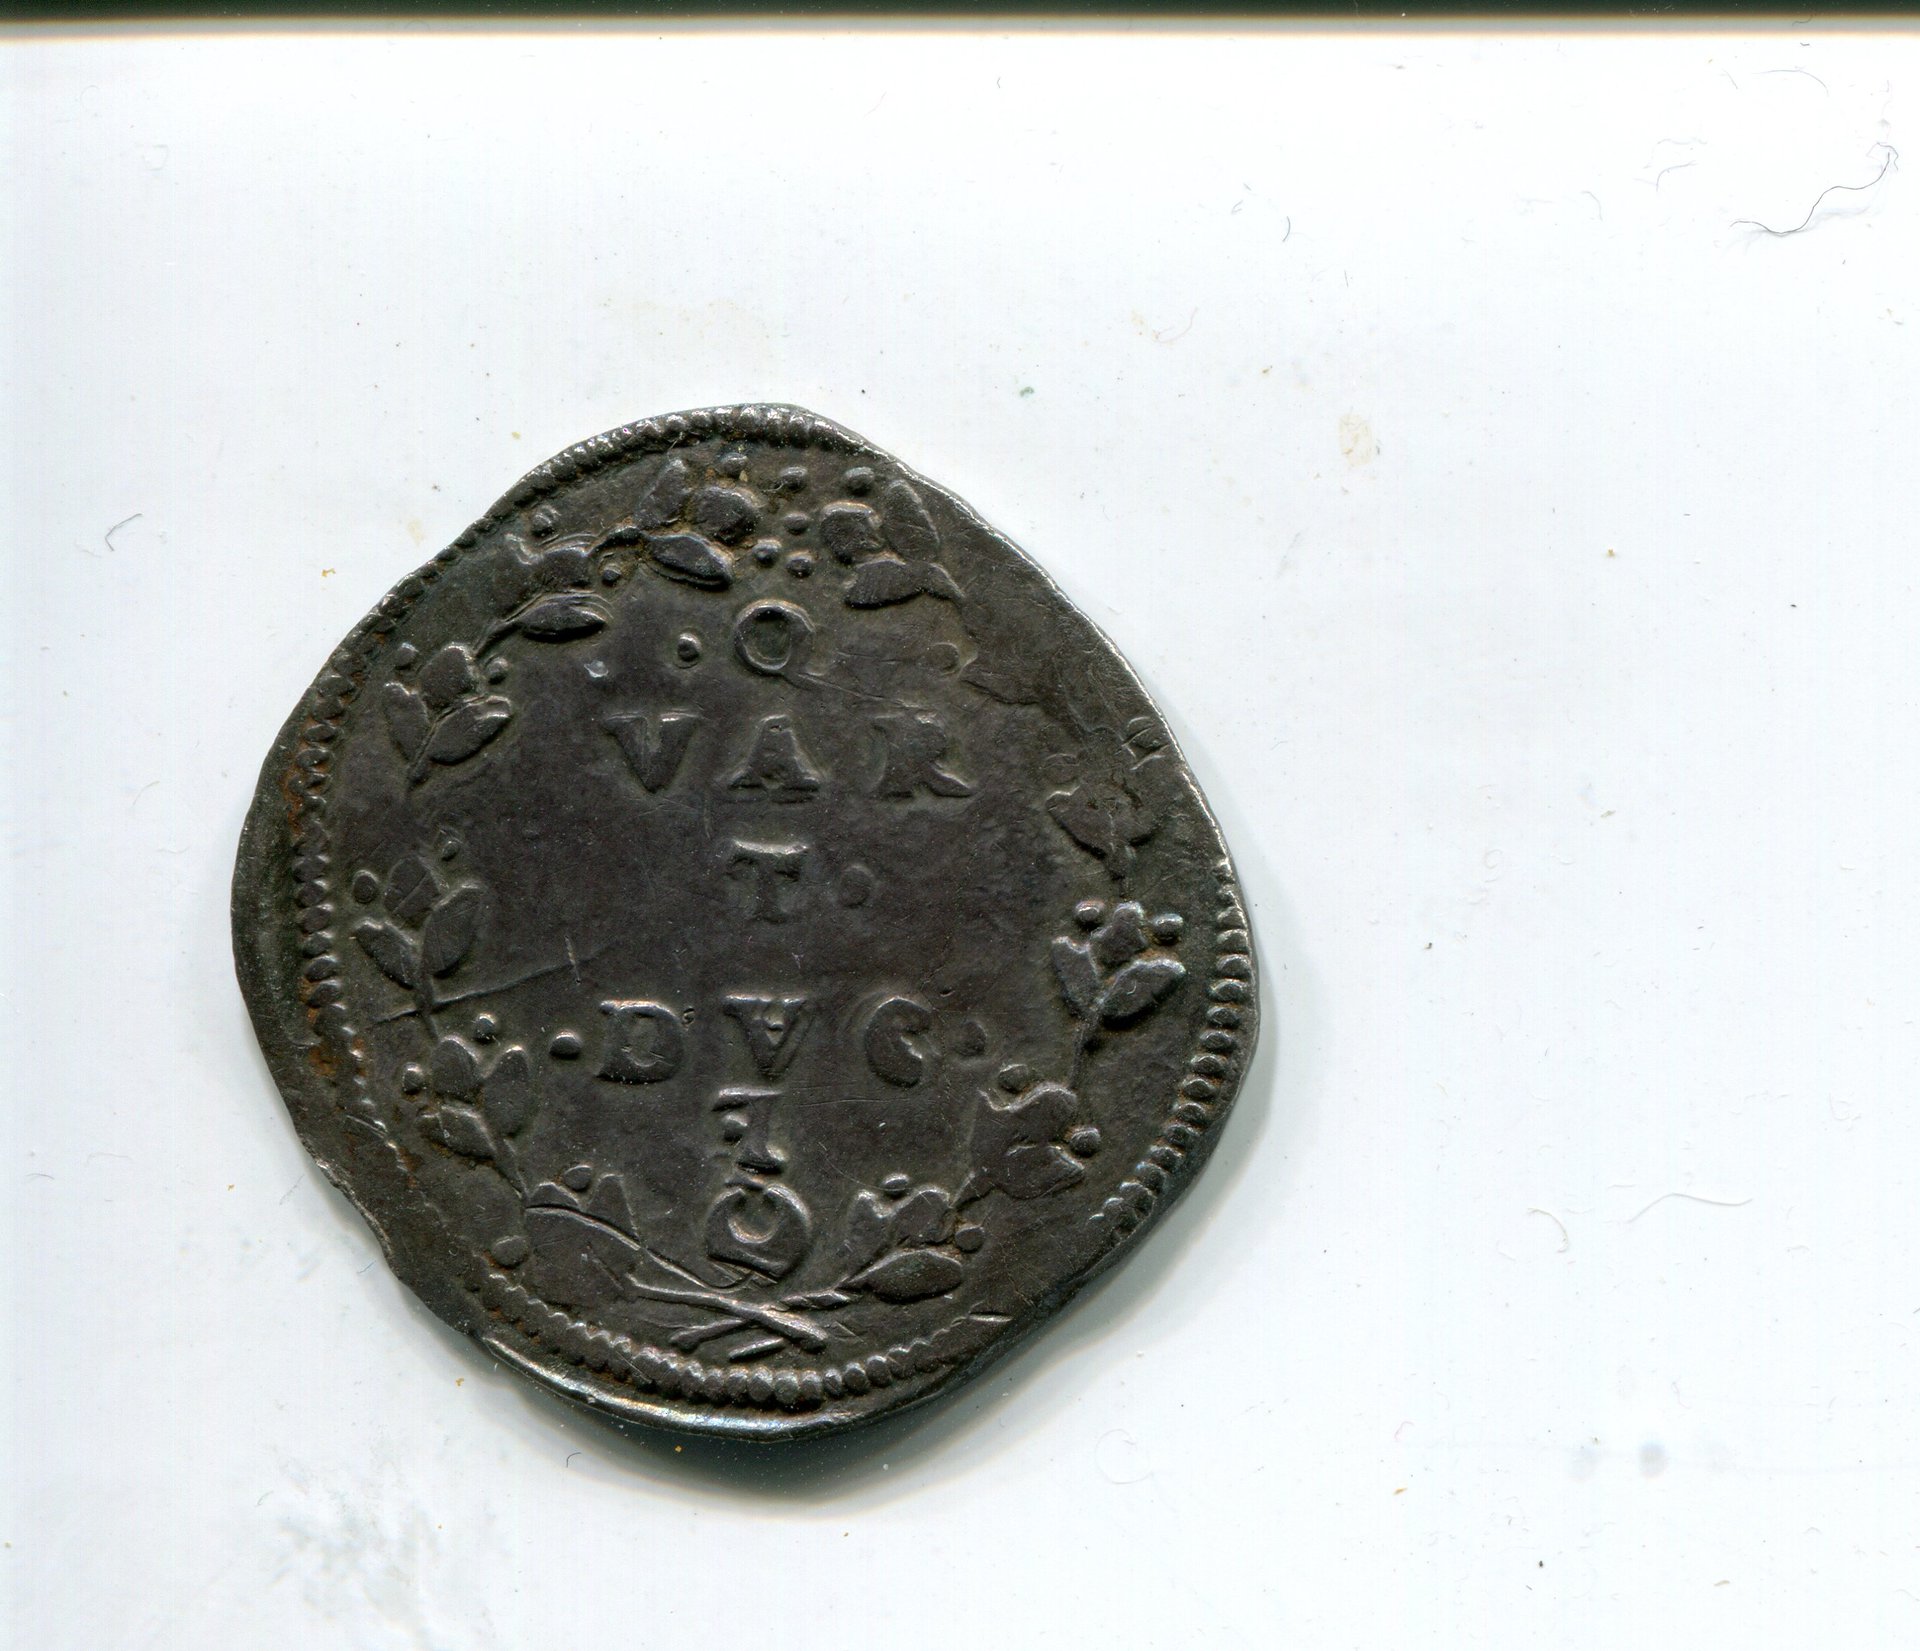 Papal States Clement VII Qtr Ducato nd 1527 LD rev 628.jpg